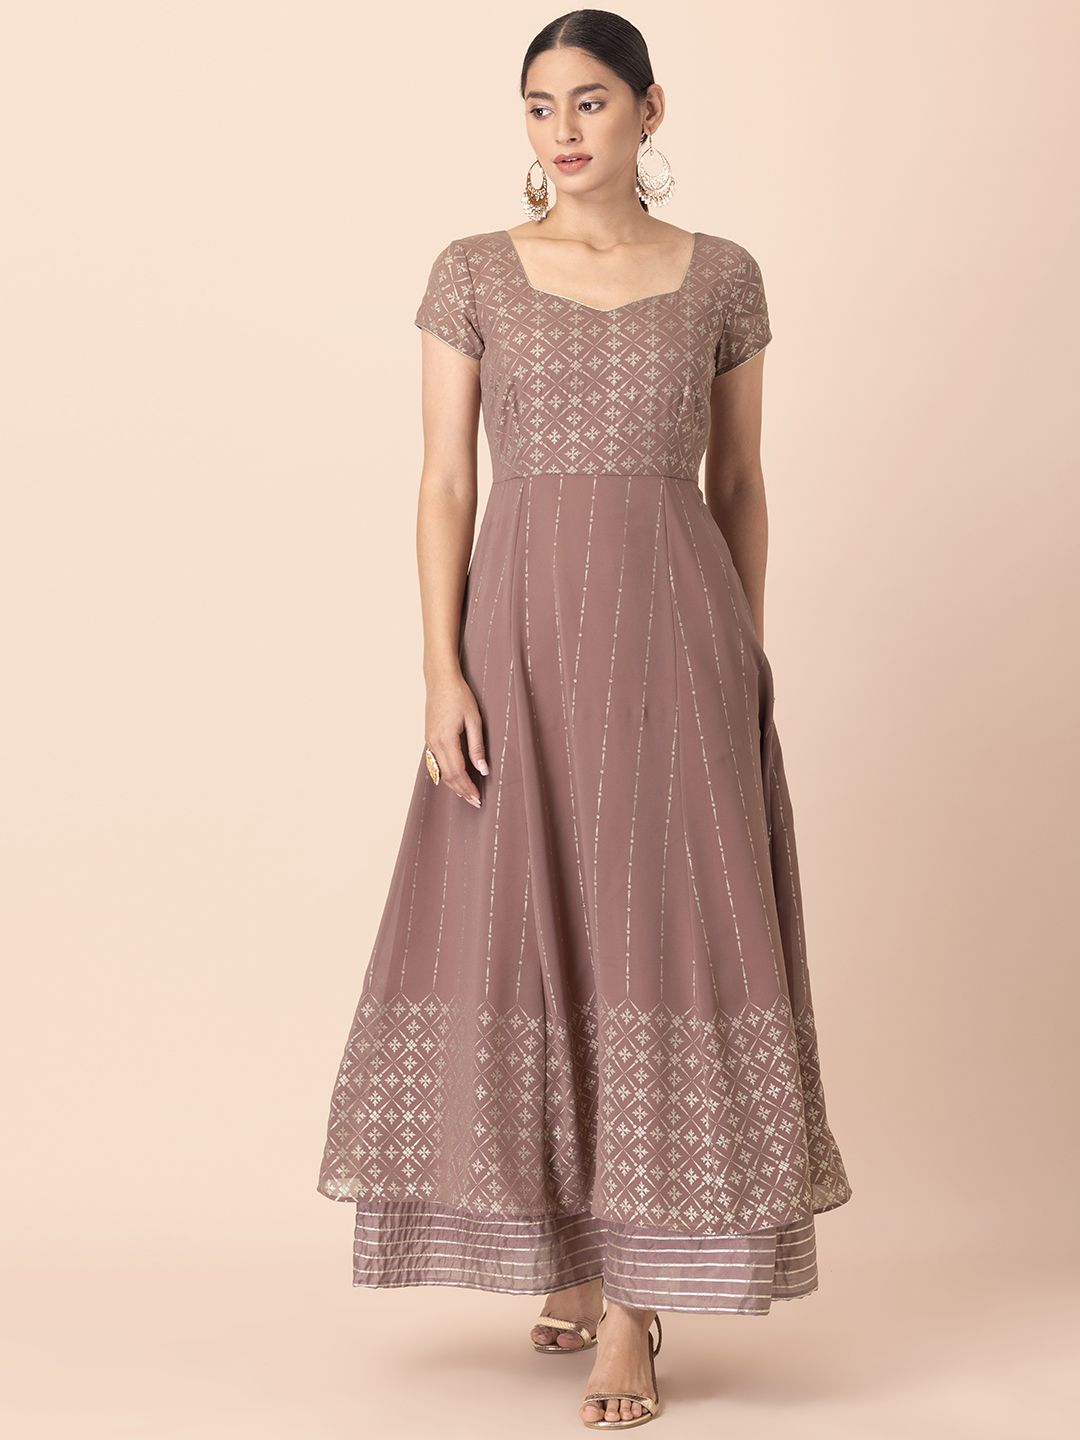 INDYA Pink Georgette Ethnic Maxi Dress Price in India